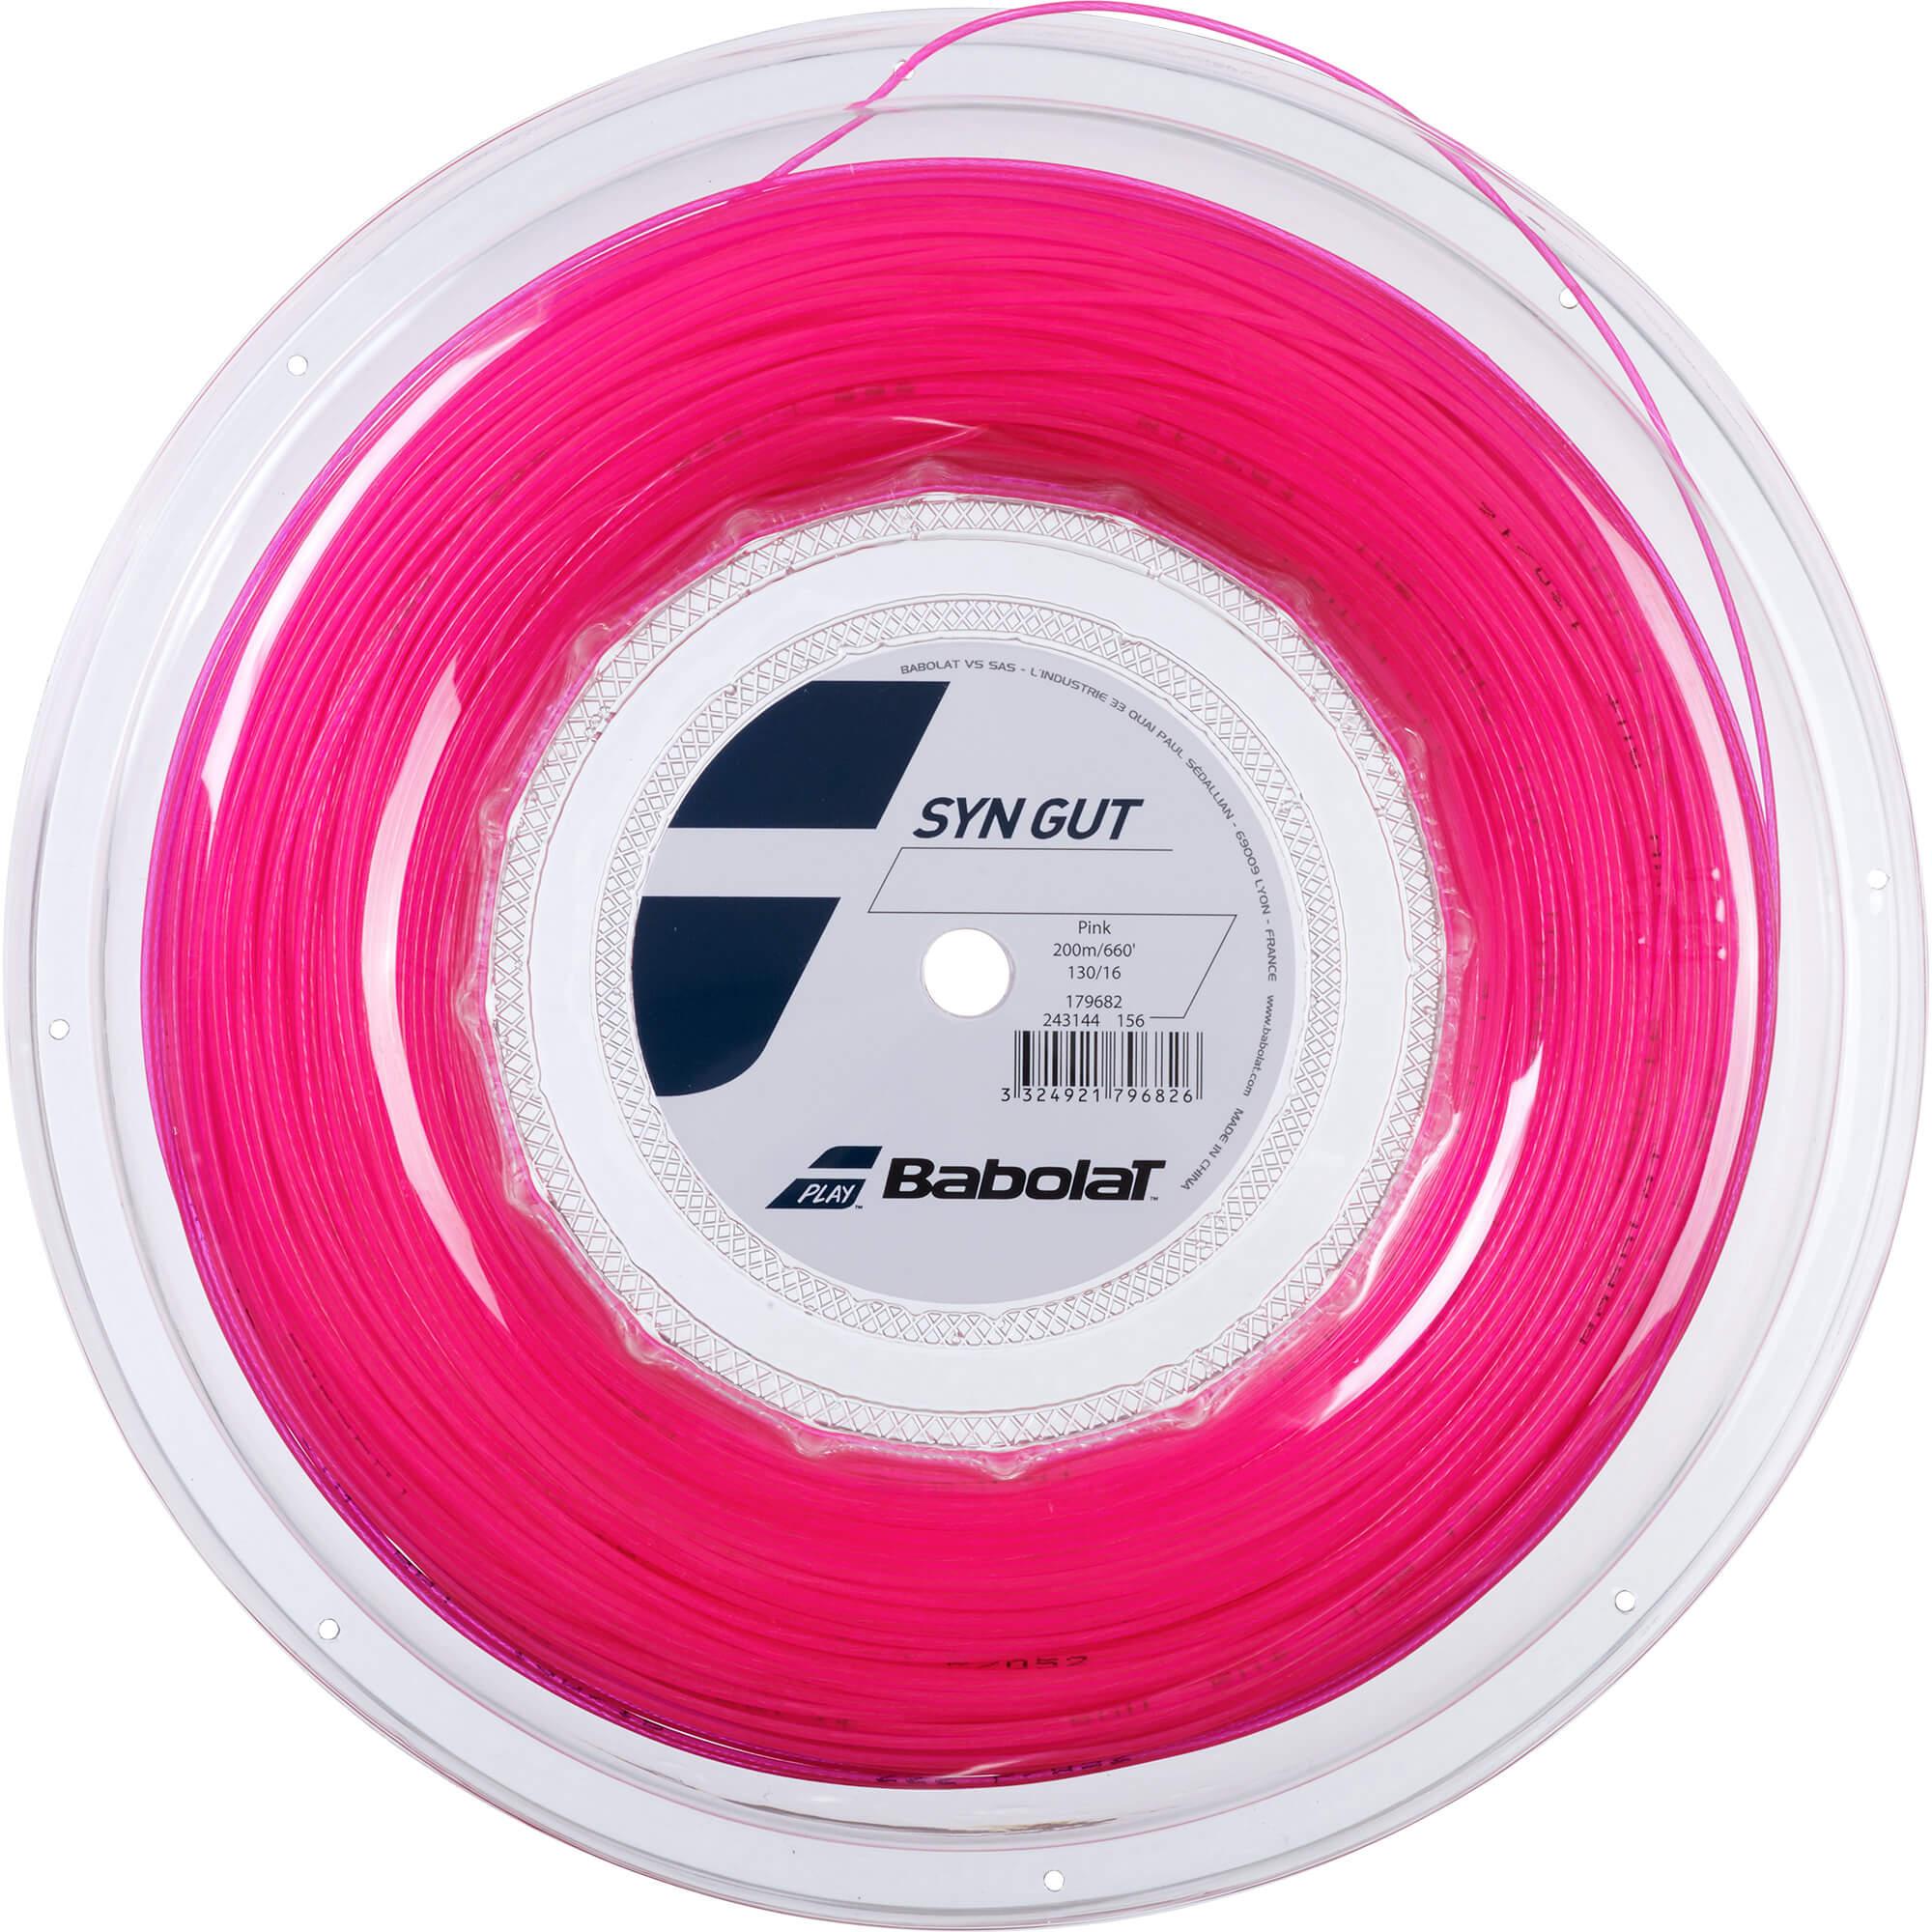 Babolat Synthetic Gut Tennis String Reel – All About Tennis